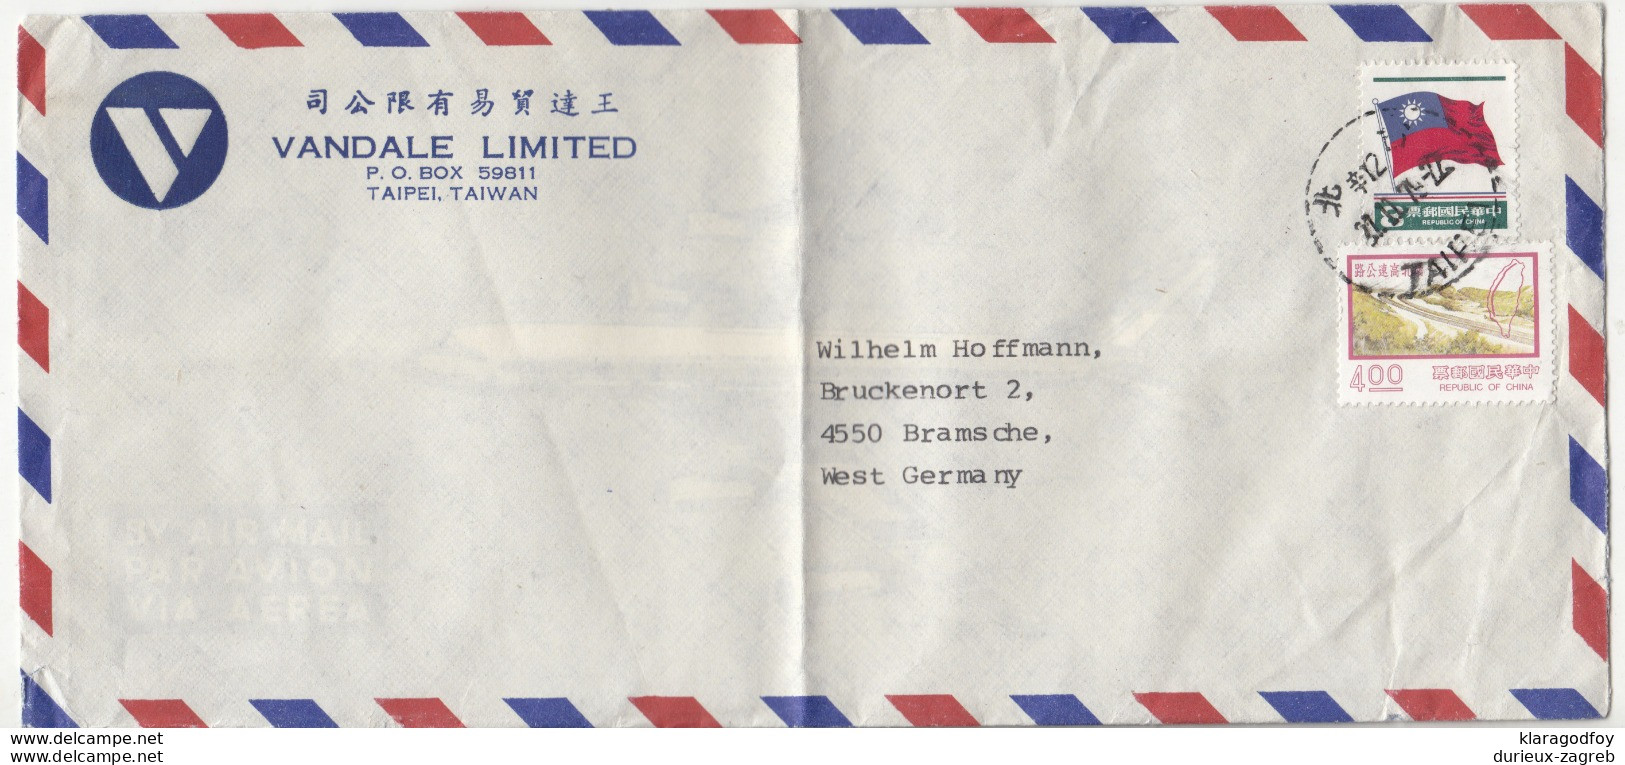 Vandale Limited Taipei Company Air Mail Letter Cover Travelled 197? To Germany B190922 - Covers & Documents